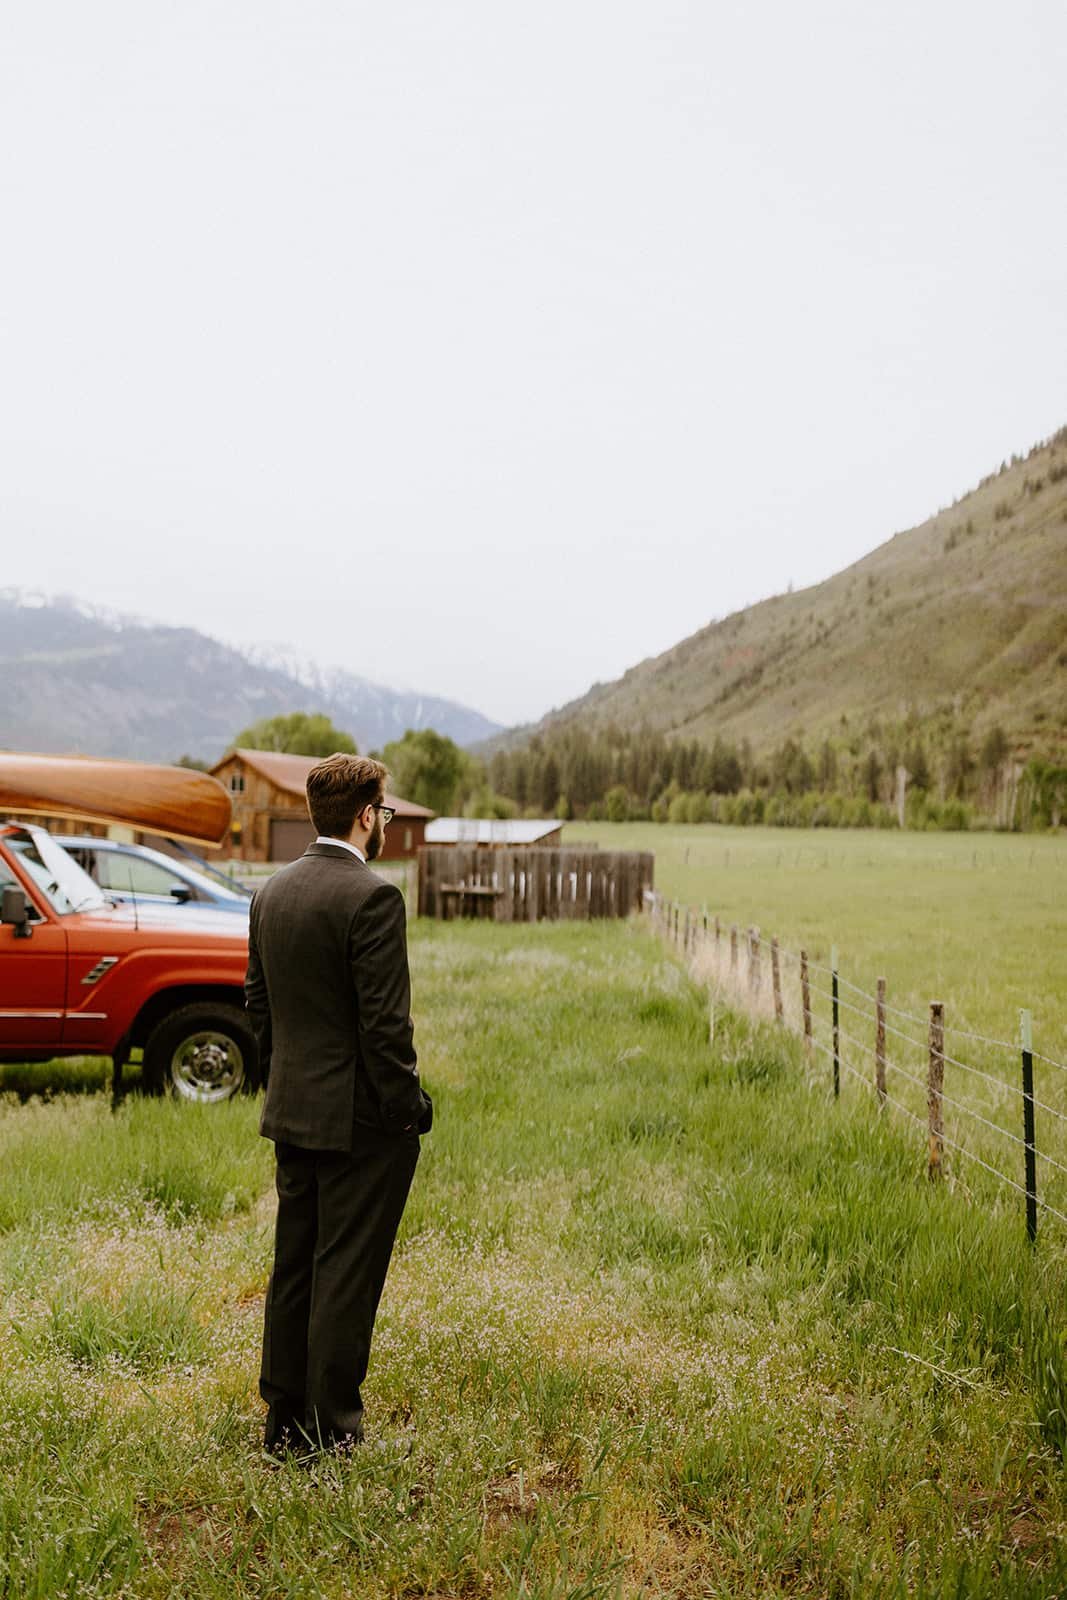 A man stands facing away during a first look in front of his Land Cruiser and the San Juan mountains